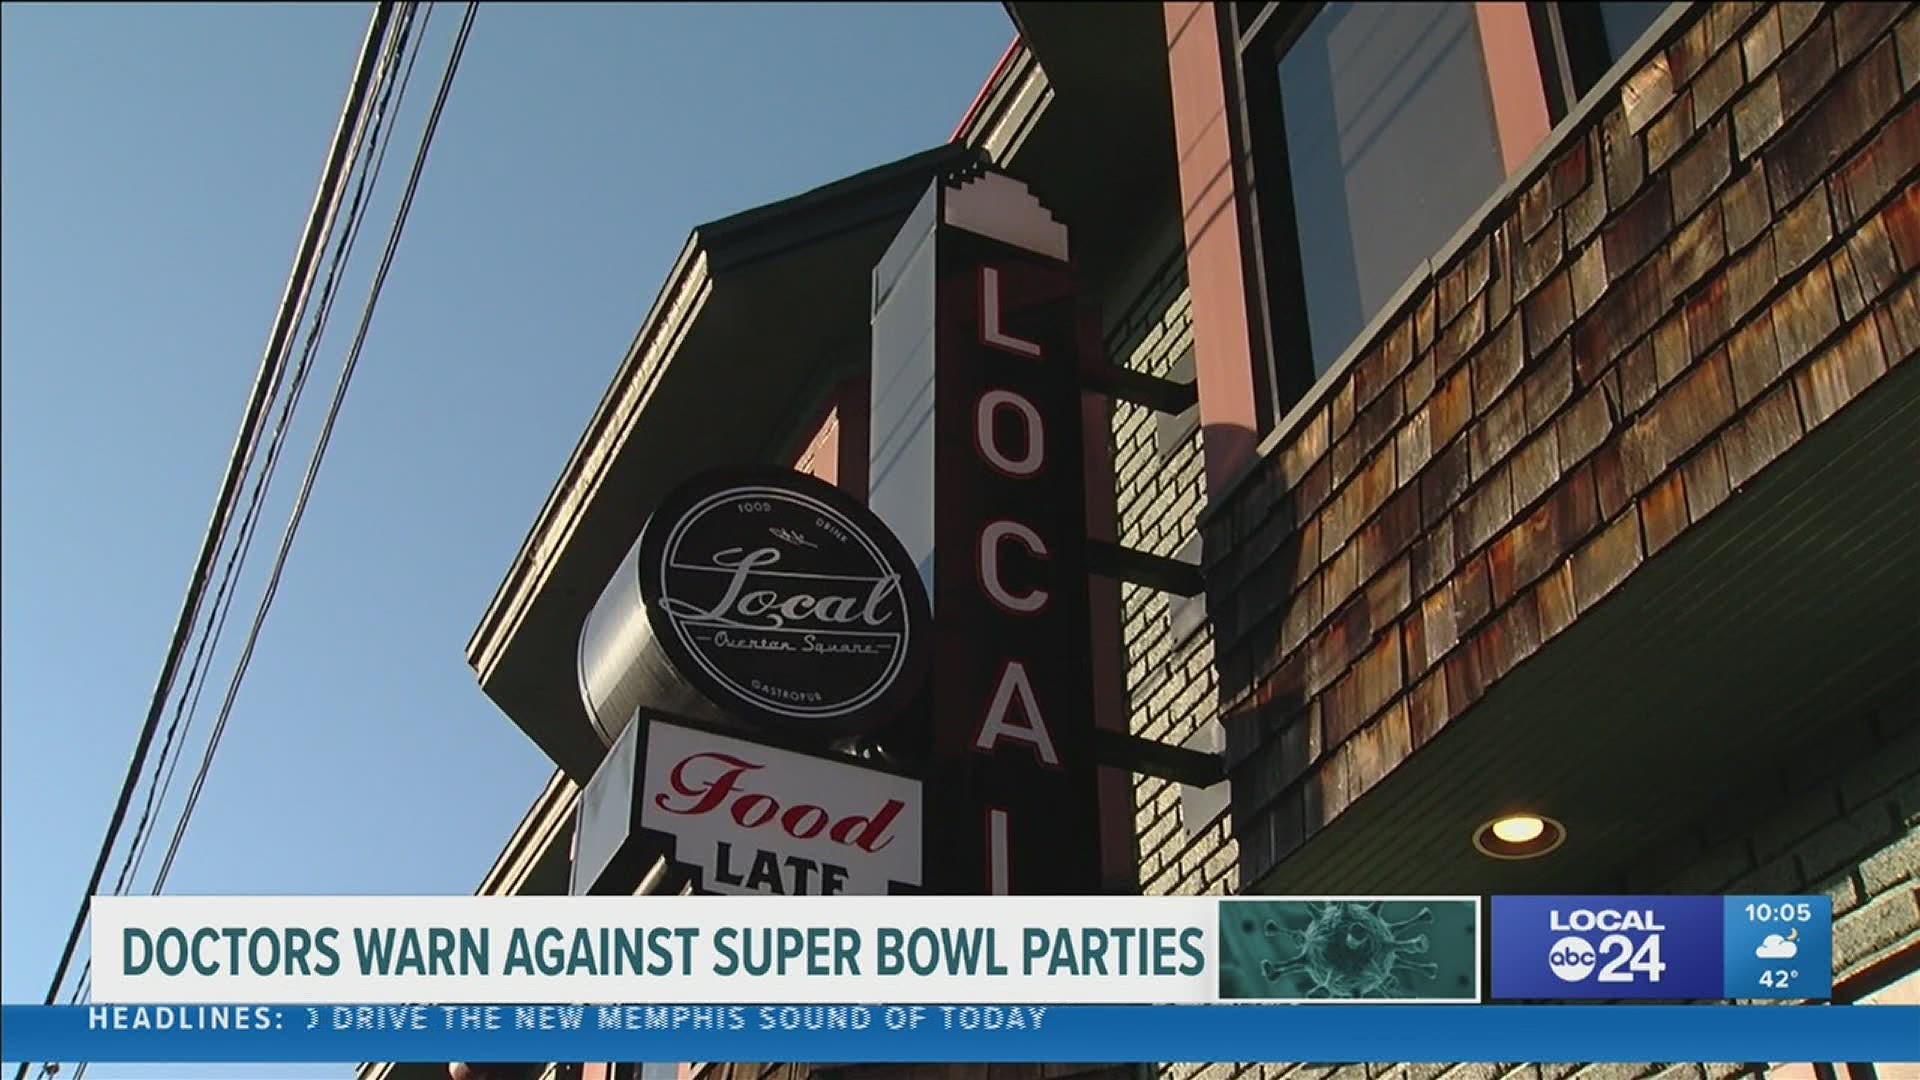 Top infectious disease specialist Dr. Anthony Fauci said you should skip the Super Bowl parties.